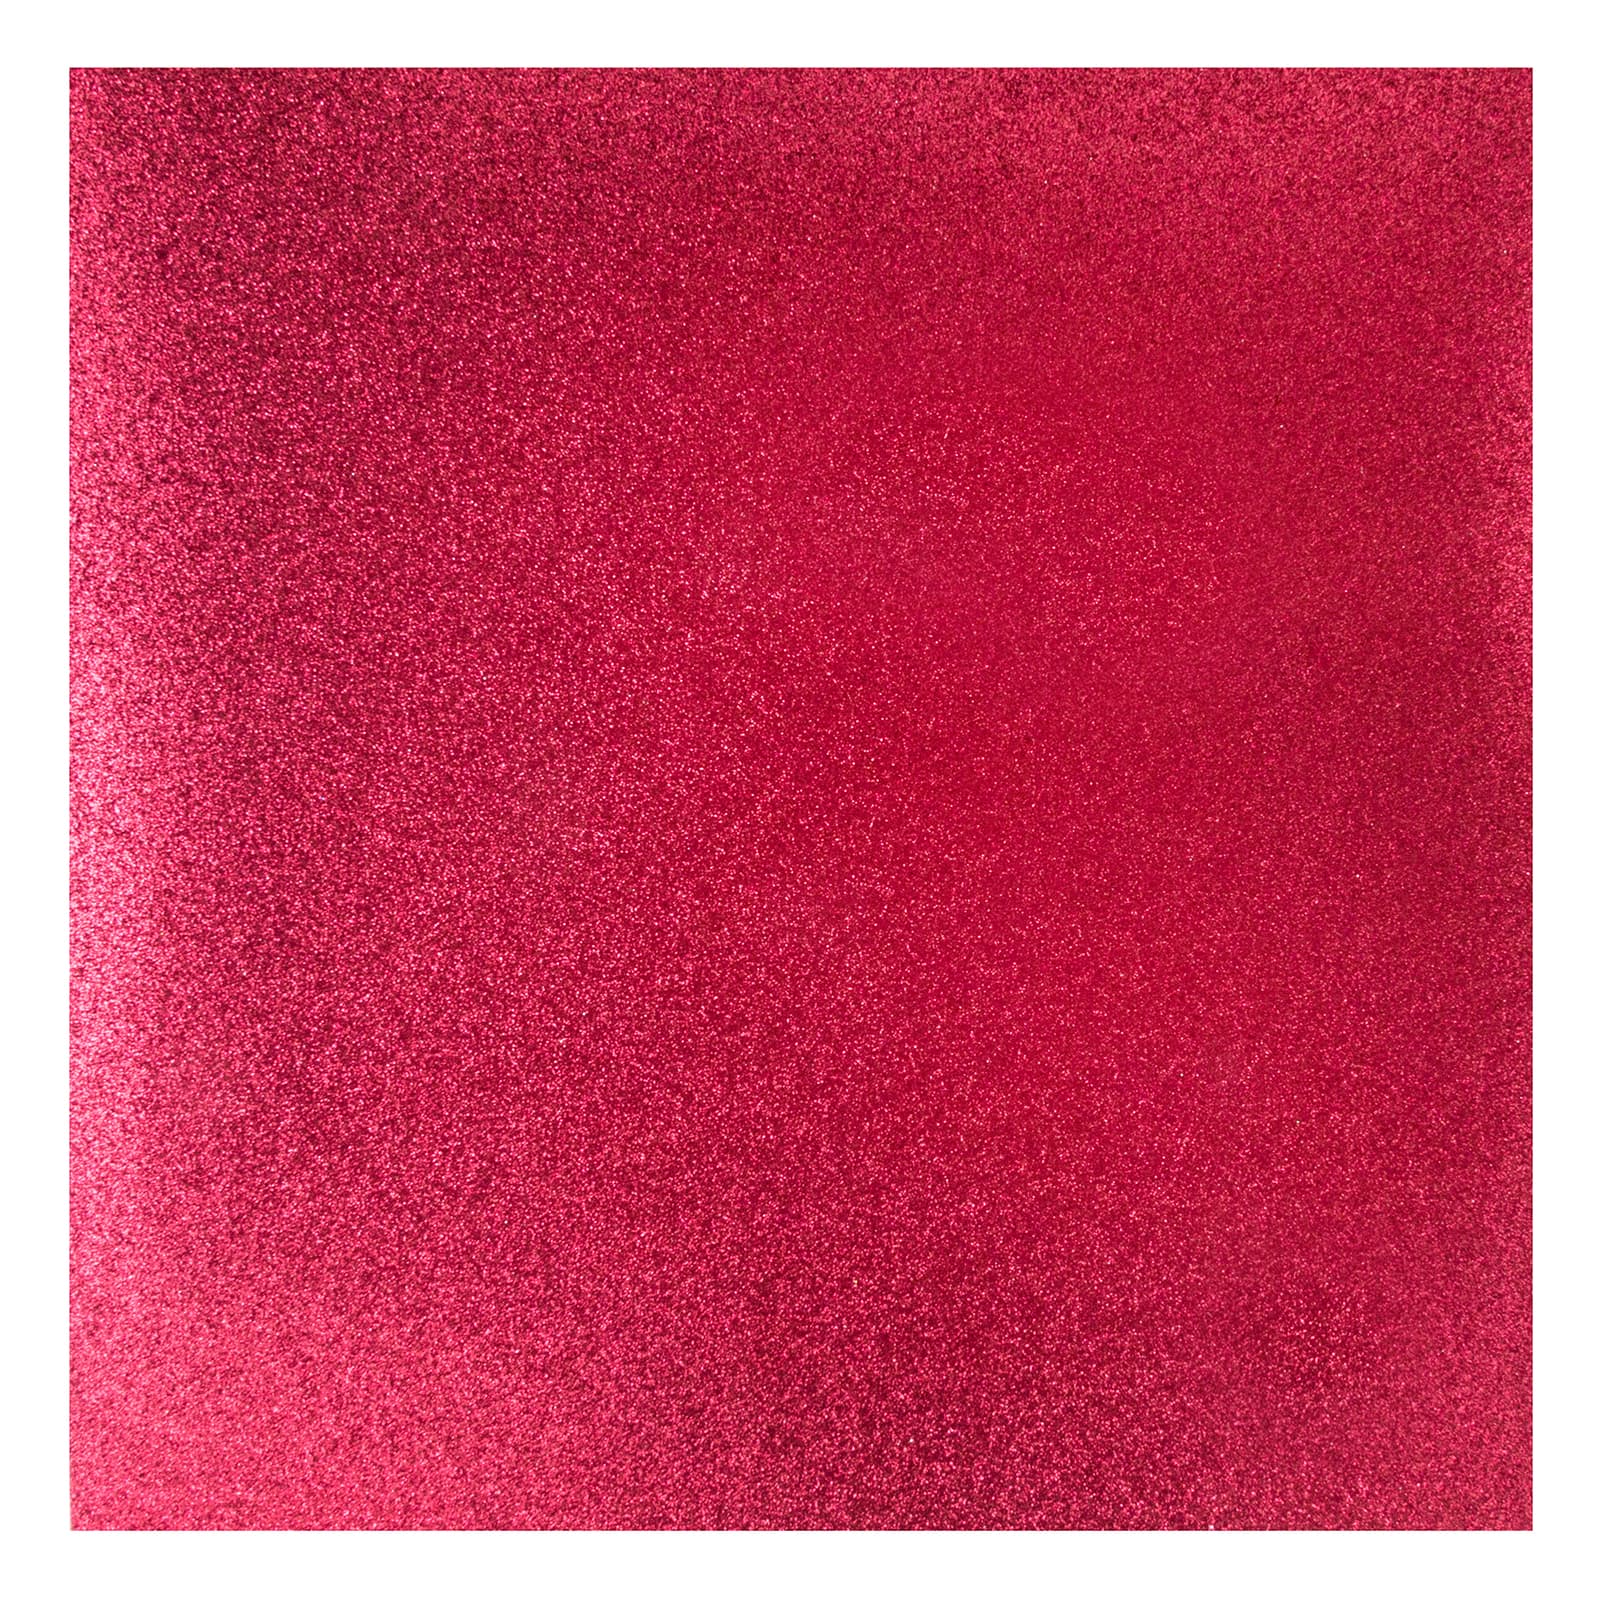 30 Pack: Burgundy Fine Glitter Paper by Recollections®, 12 x 12